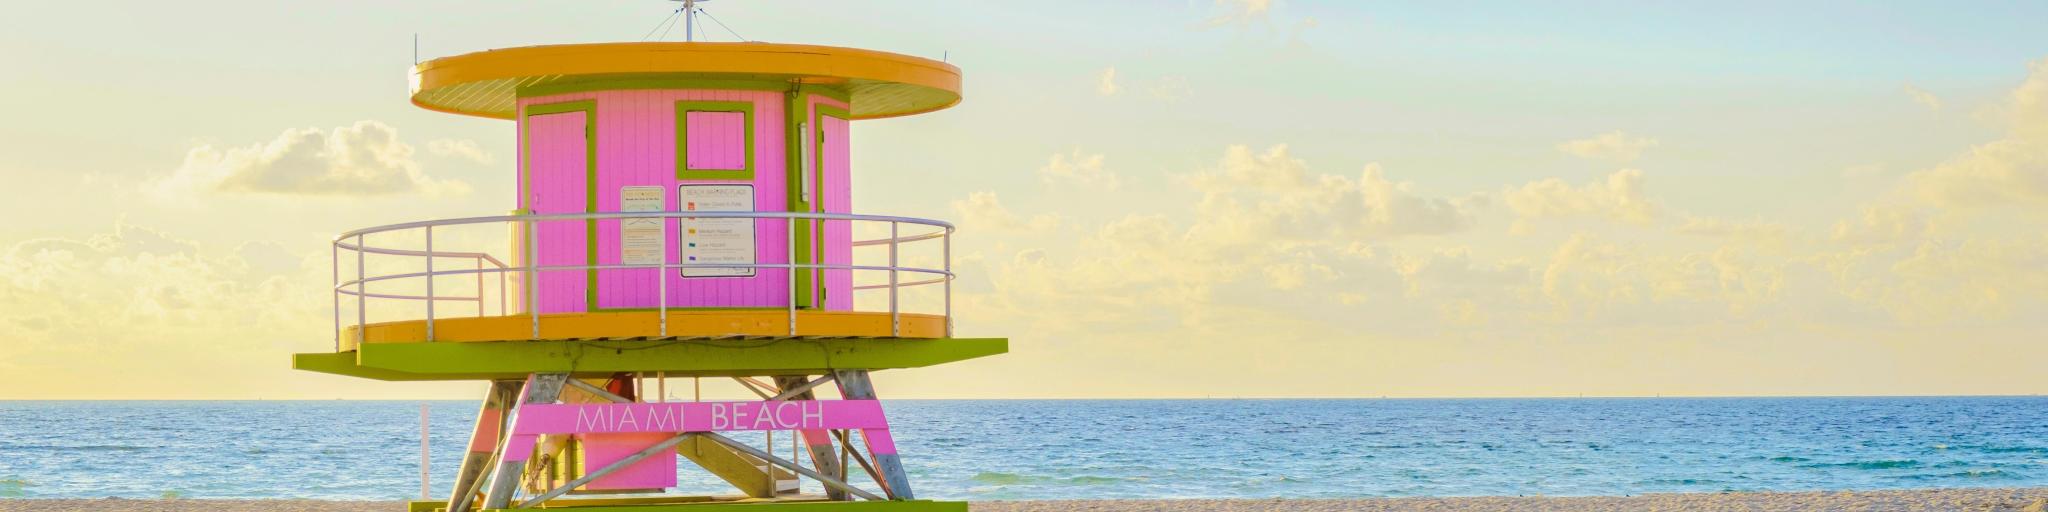 Pink lifeguard hut on Miami Beach with the ocean in the background